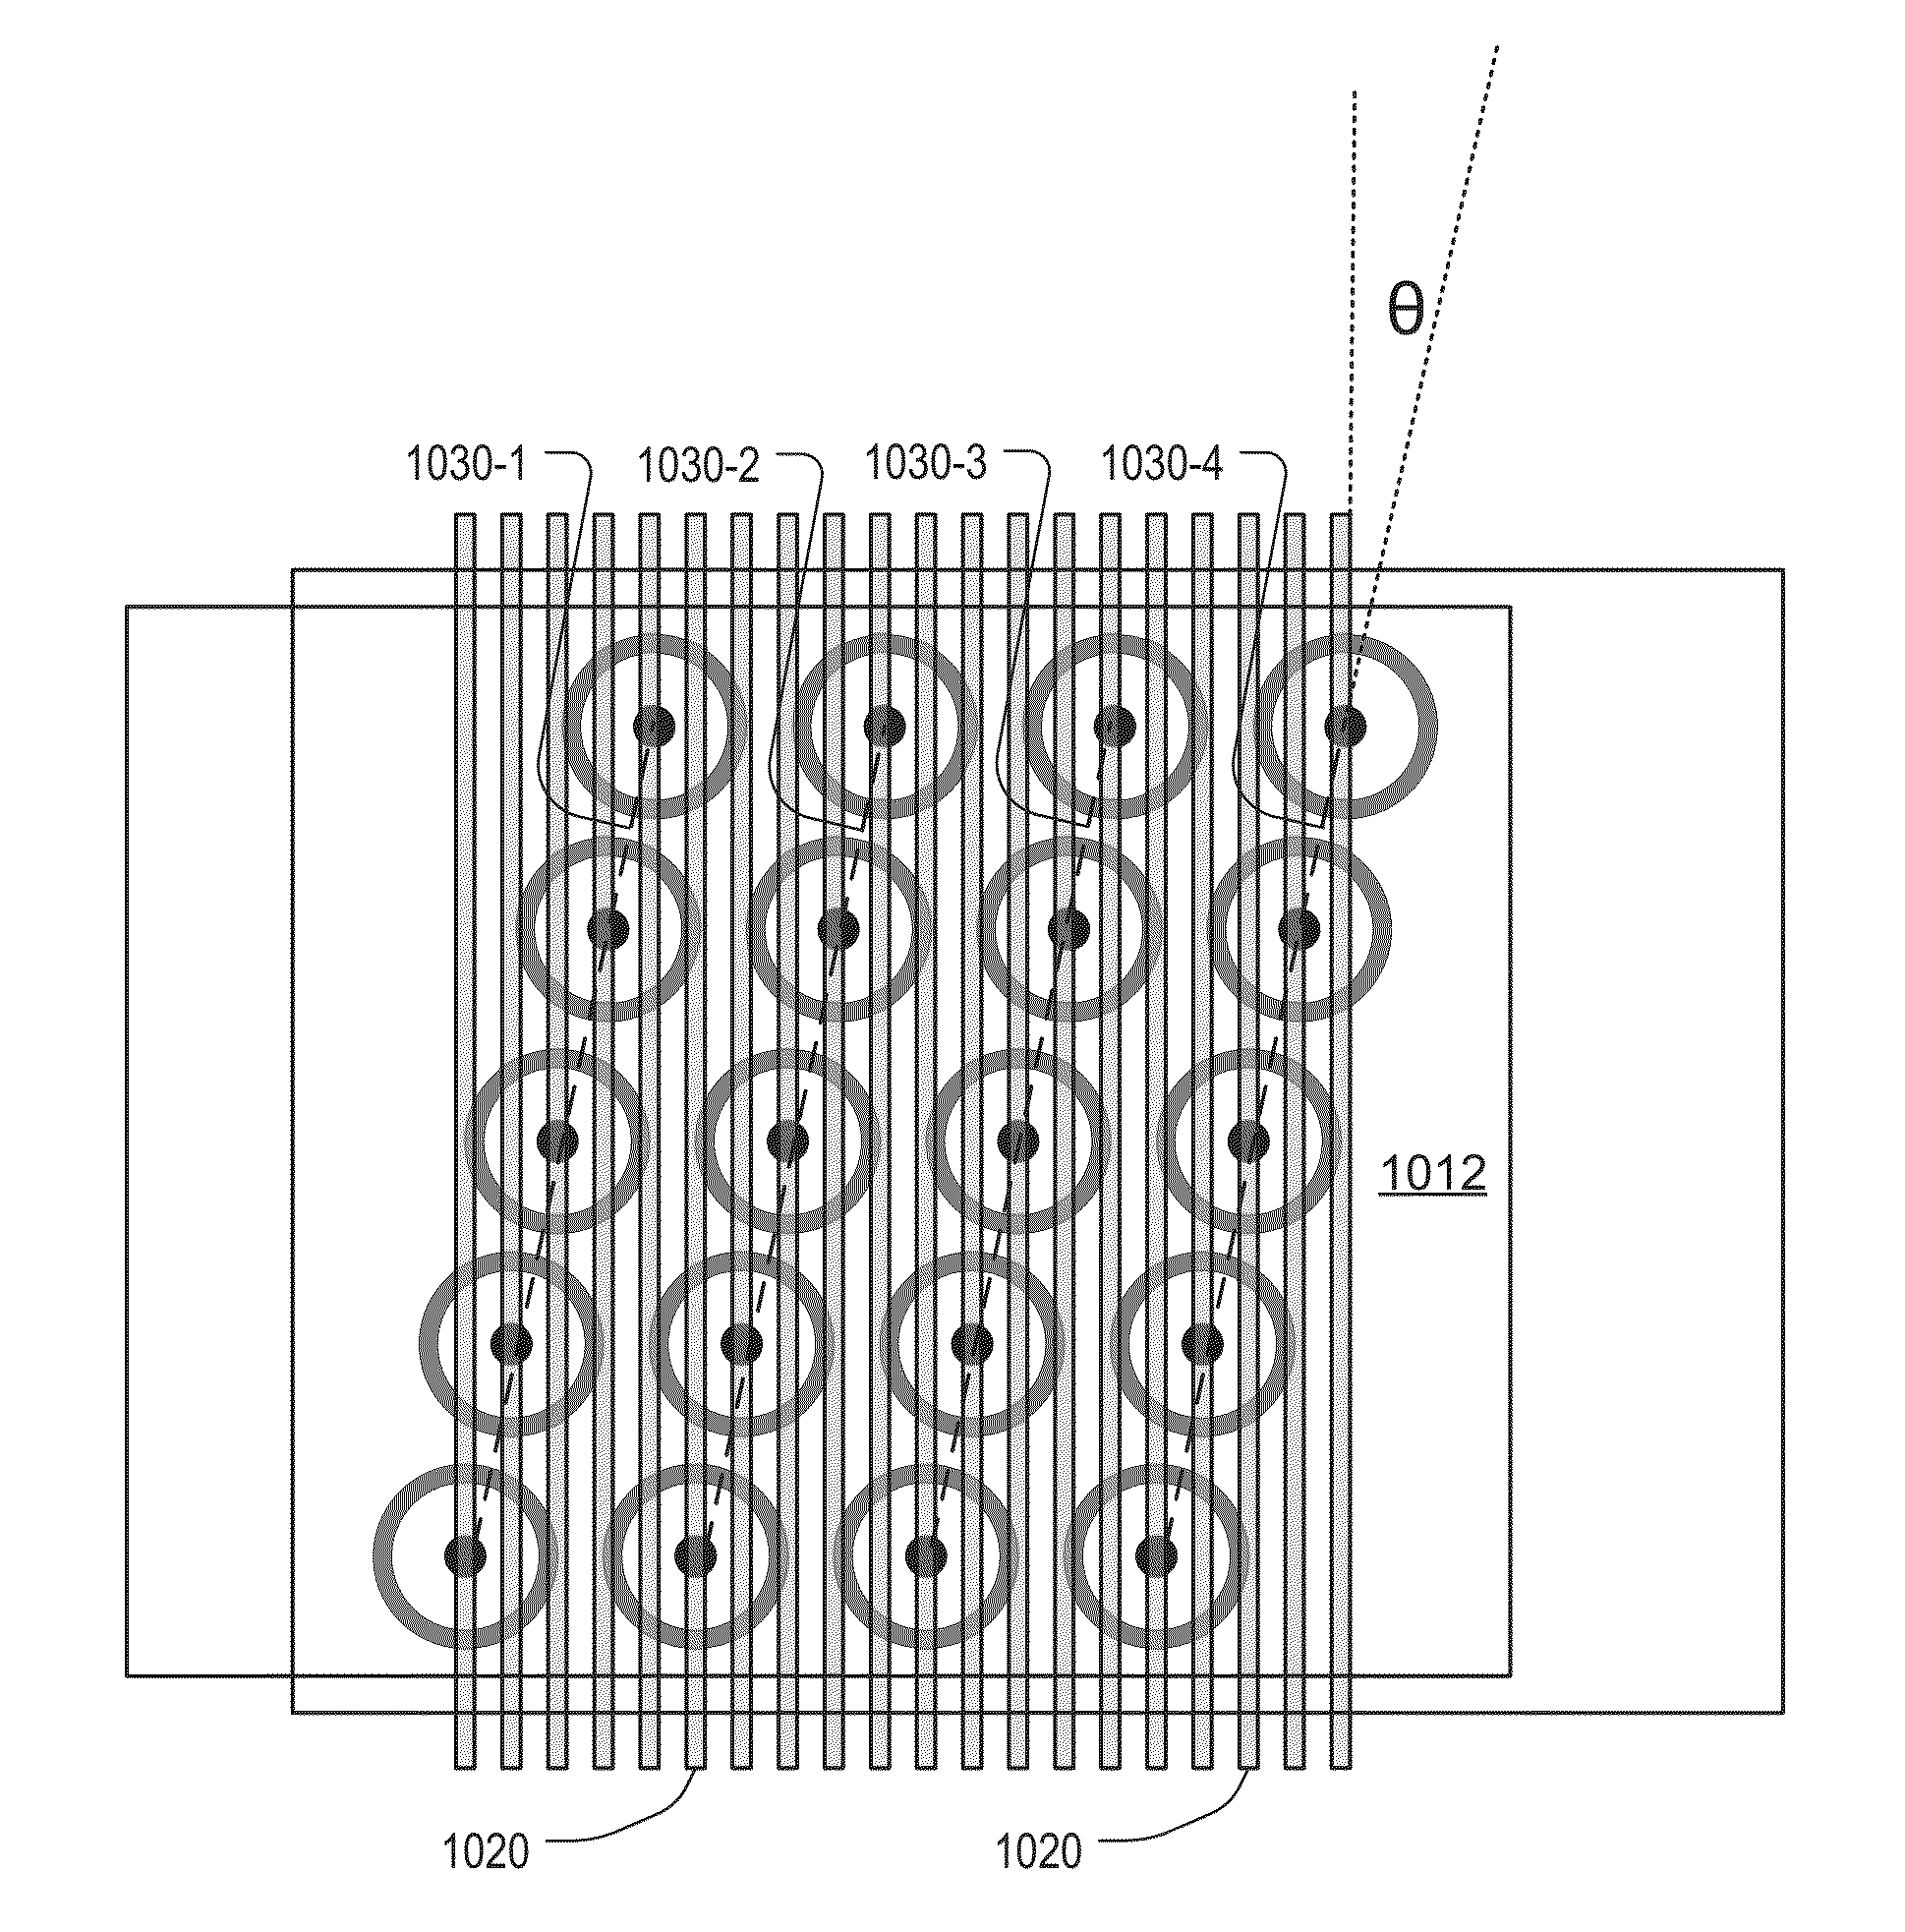 Parallelogram cell design for high speed vertical channel 3D NAND memory